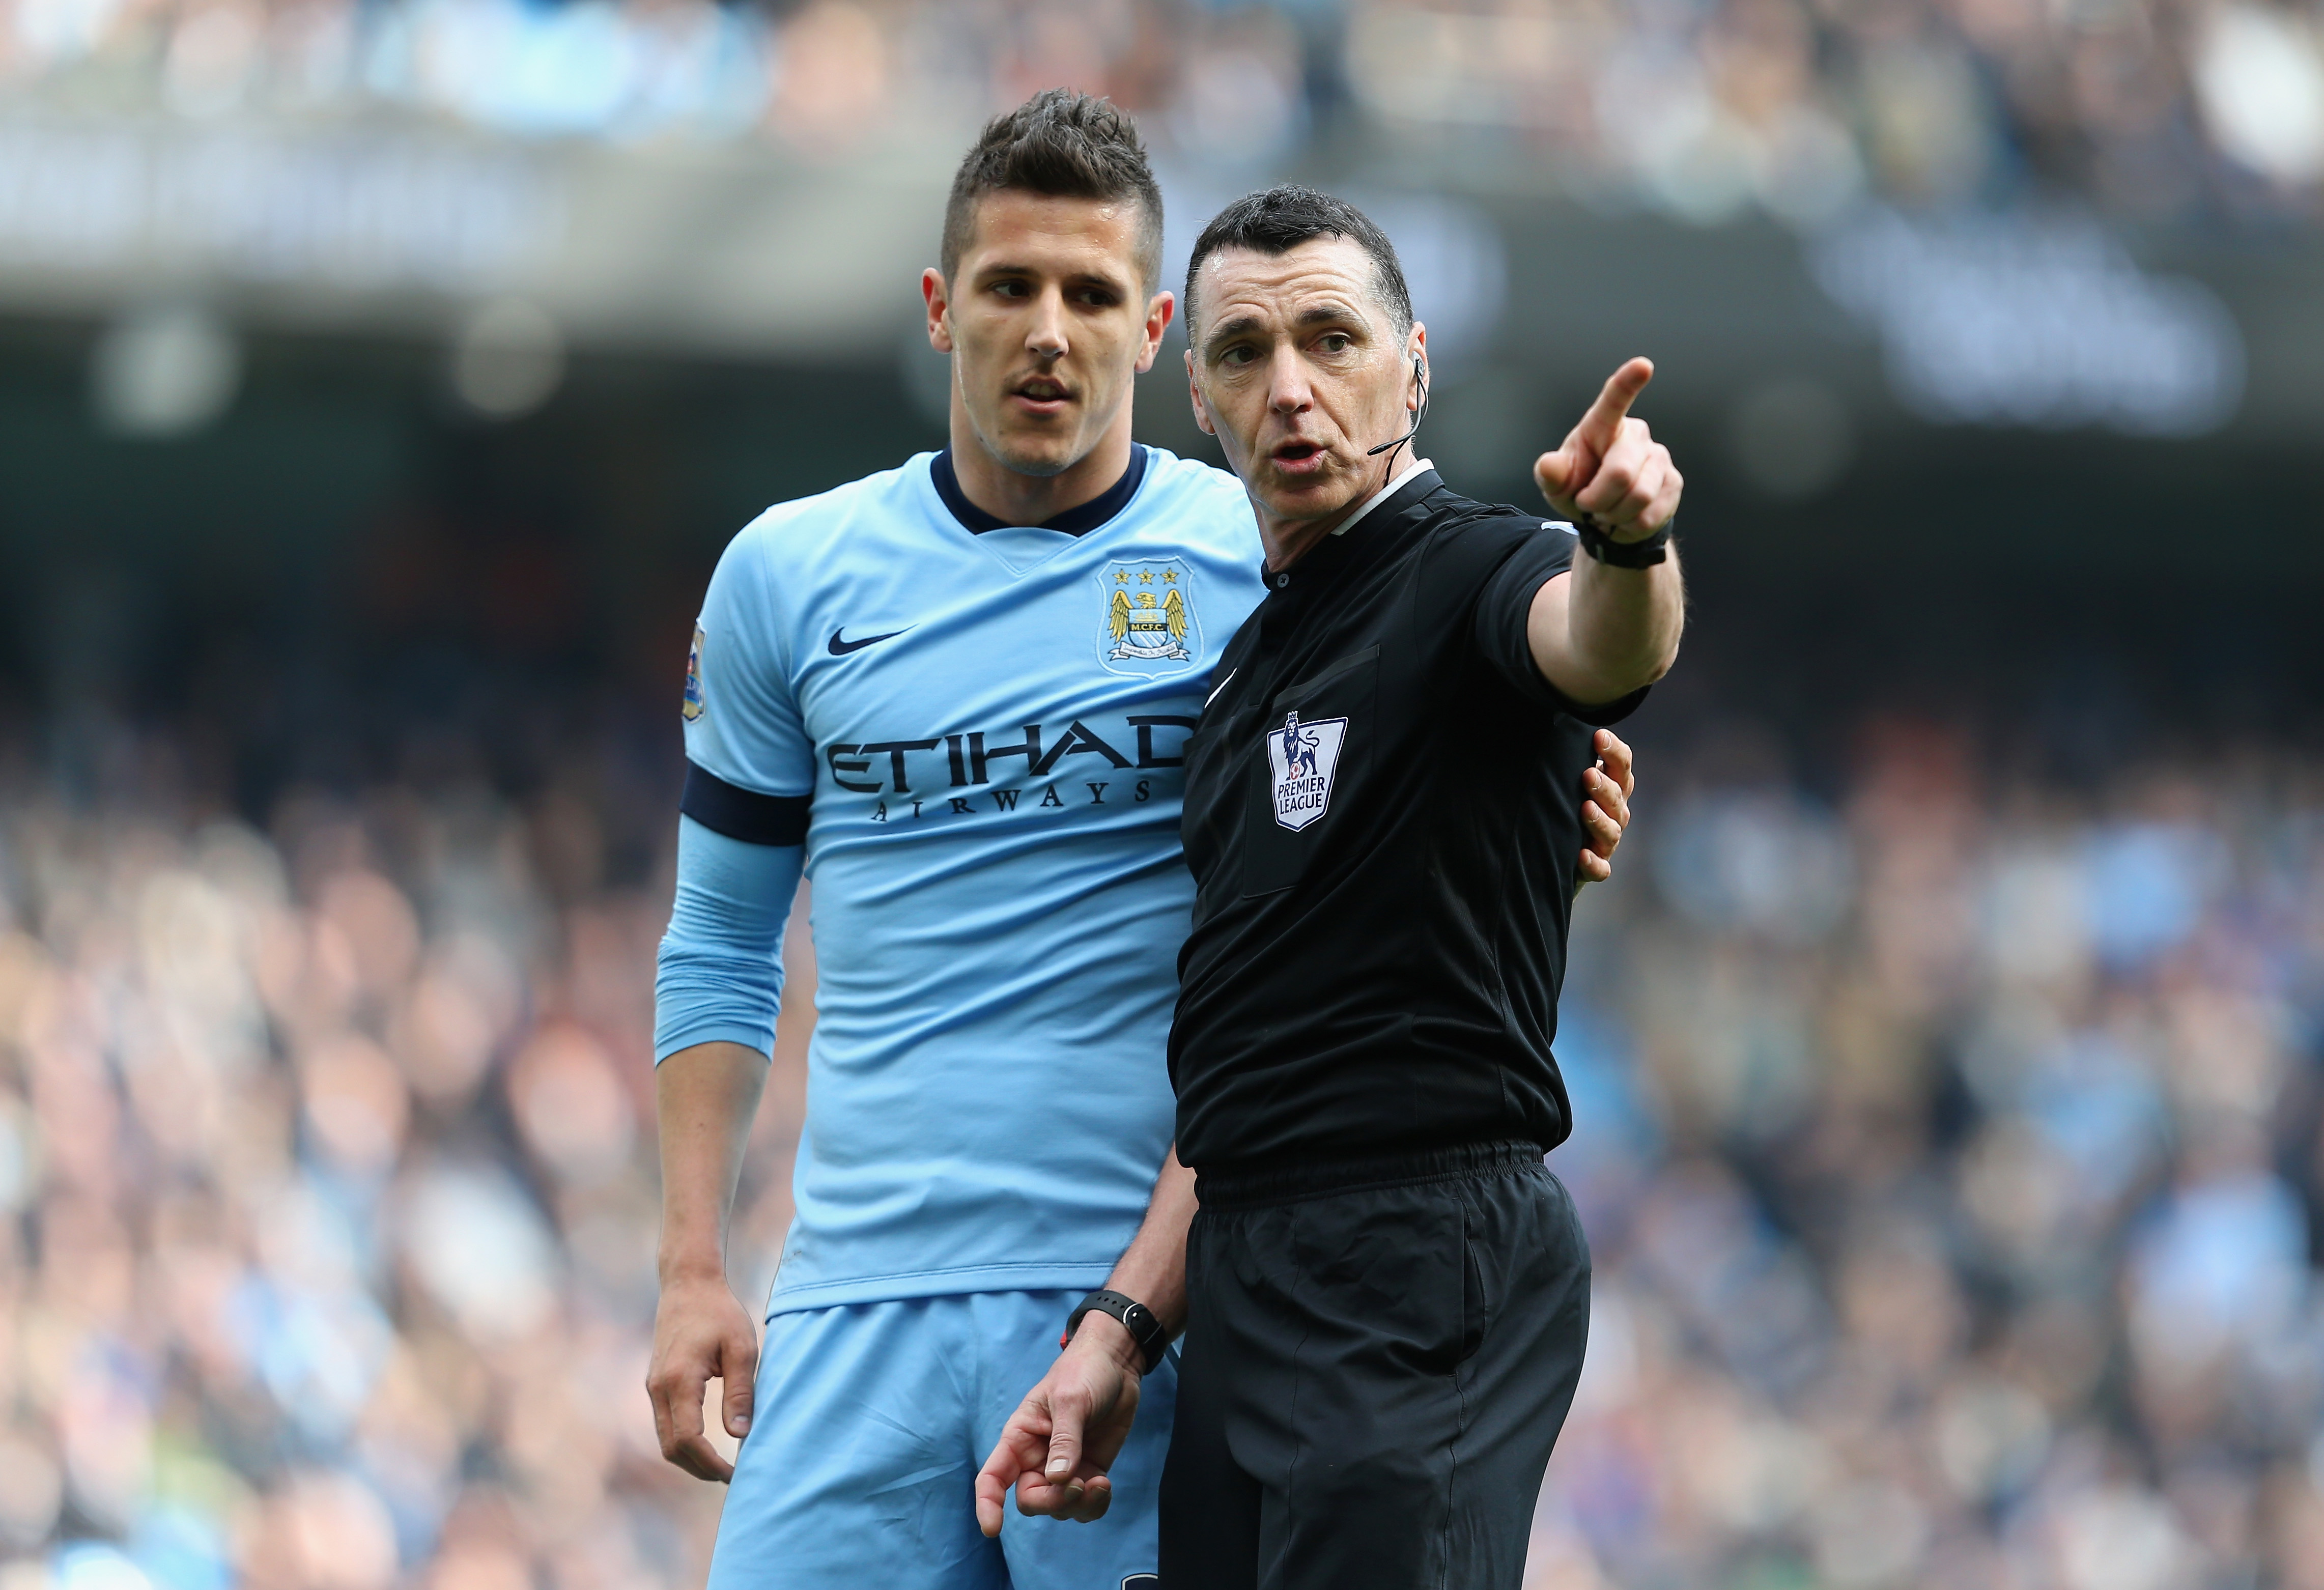 Sky: The strategy to get a “yes” from City for Jovetic